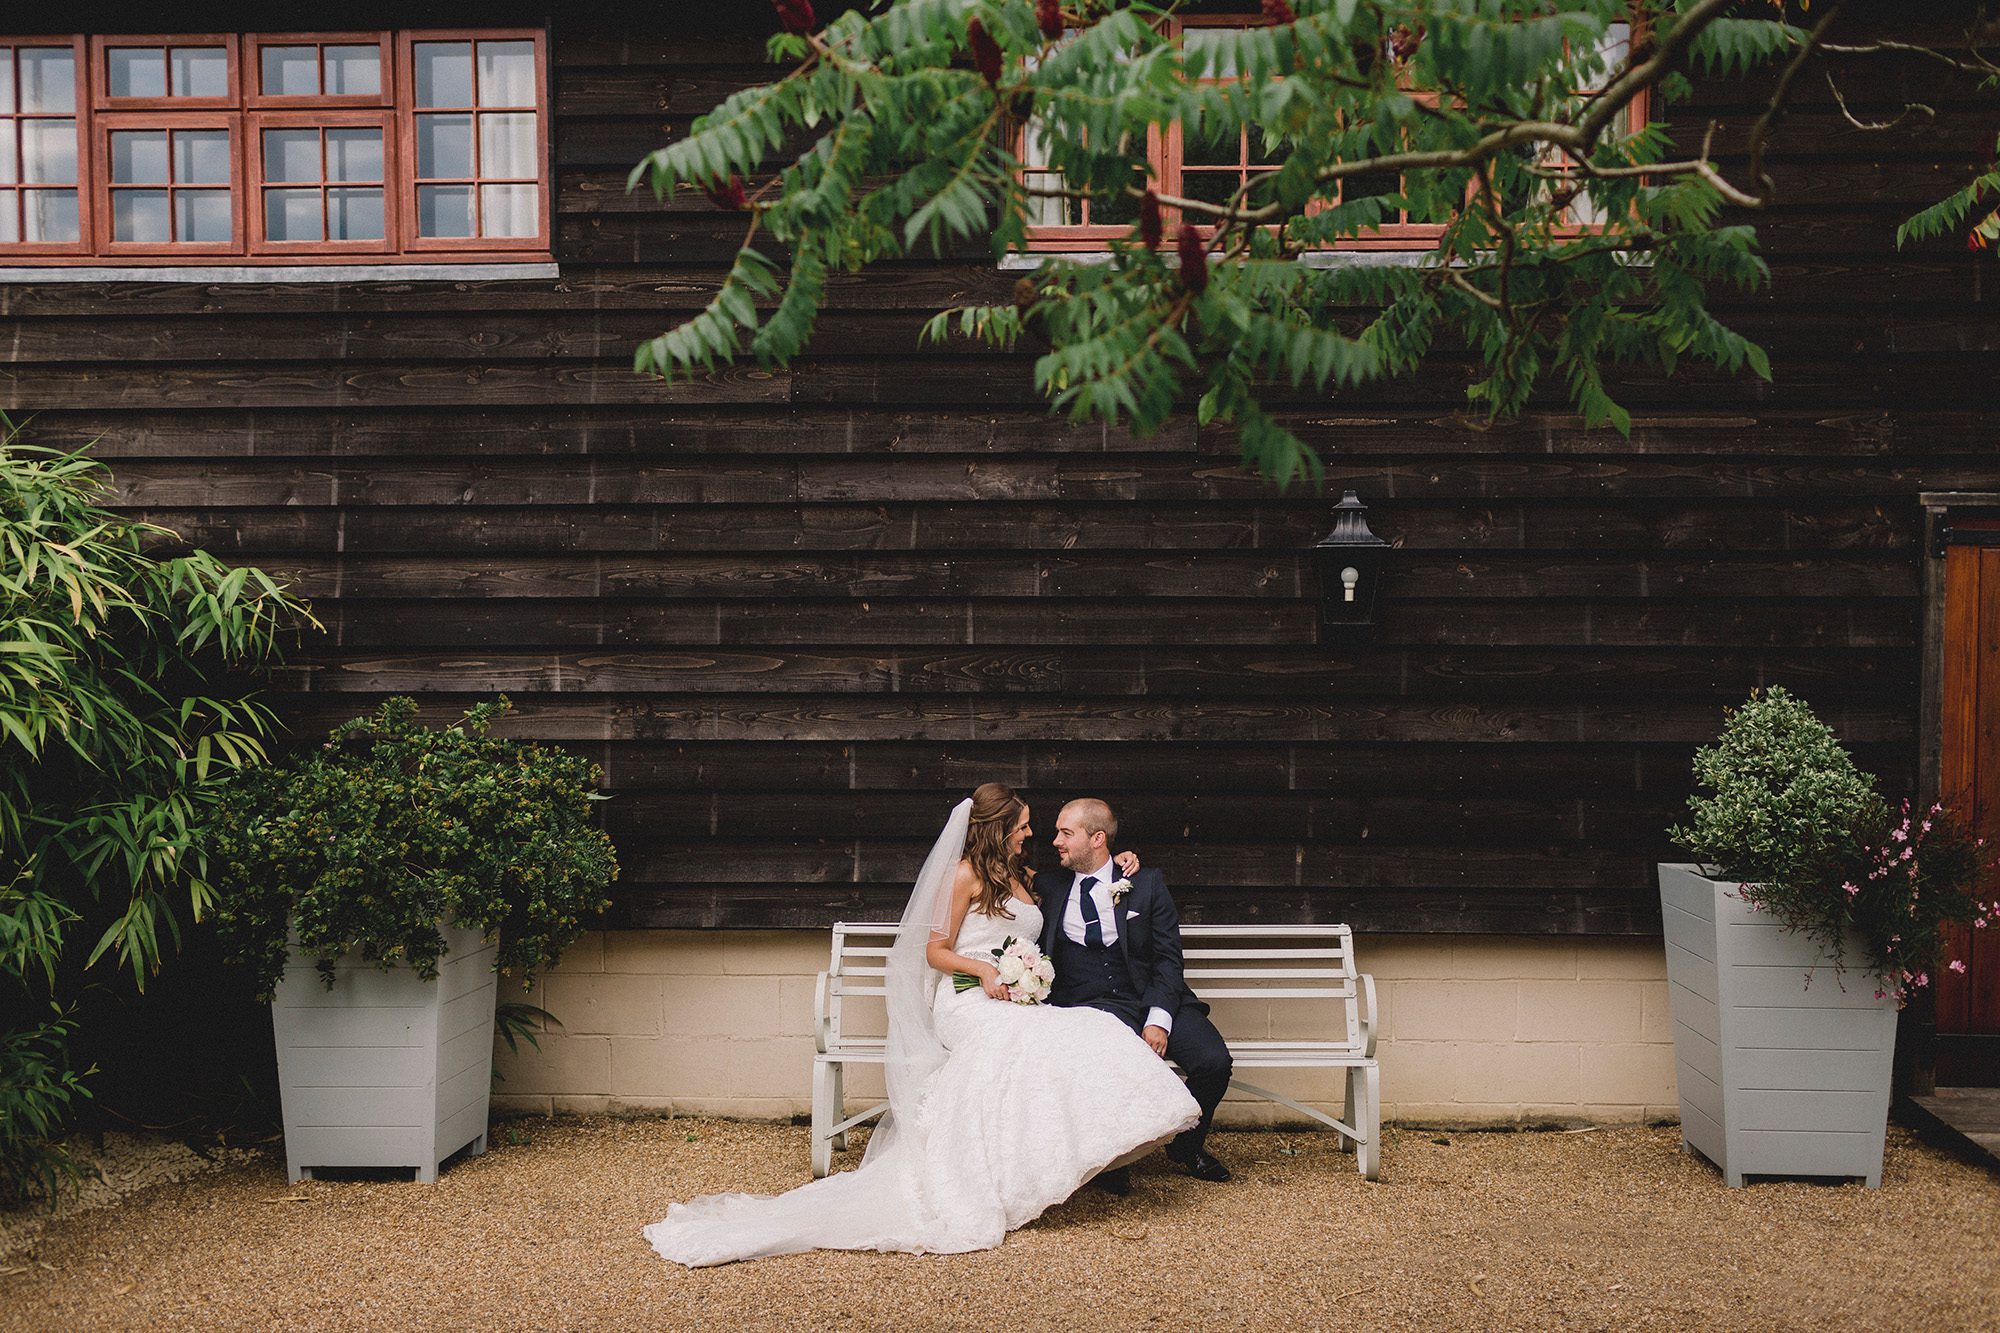 Bride and groom hug closely on their wedding day at Gate Street Barn in Guildford.